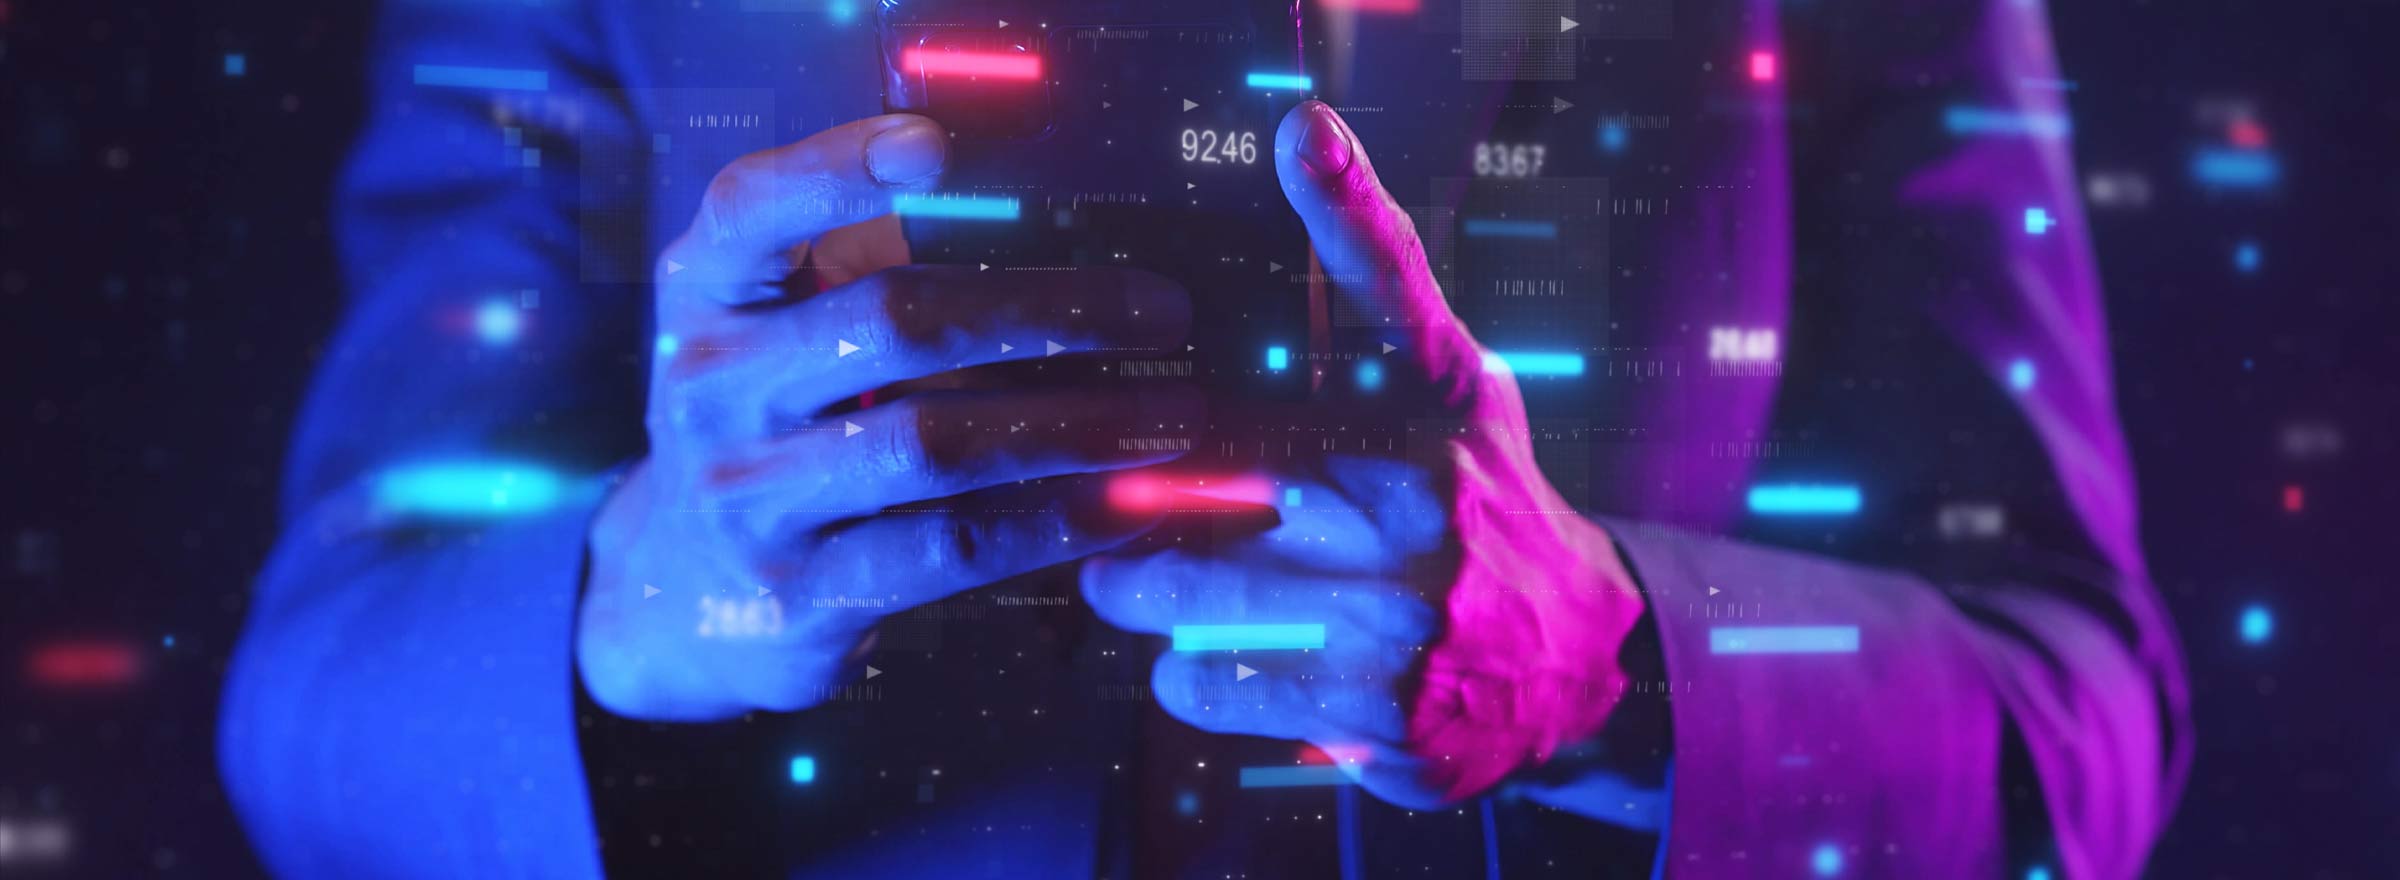 hands holding a device amid lots of colored lights